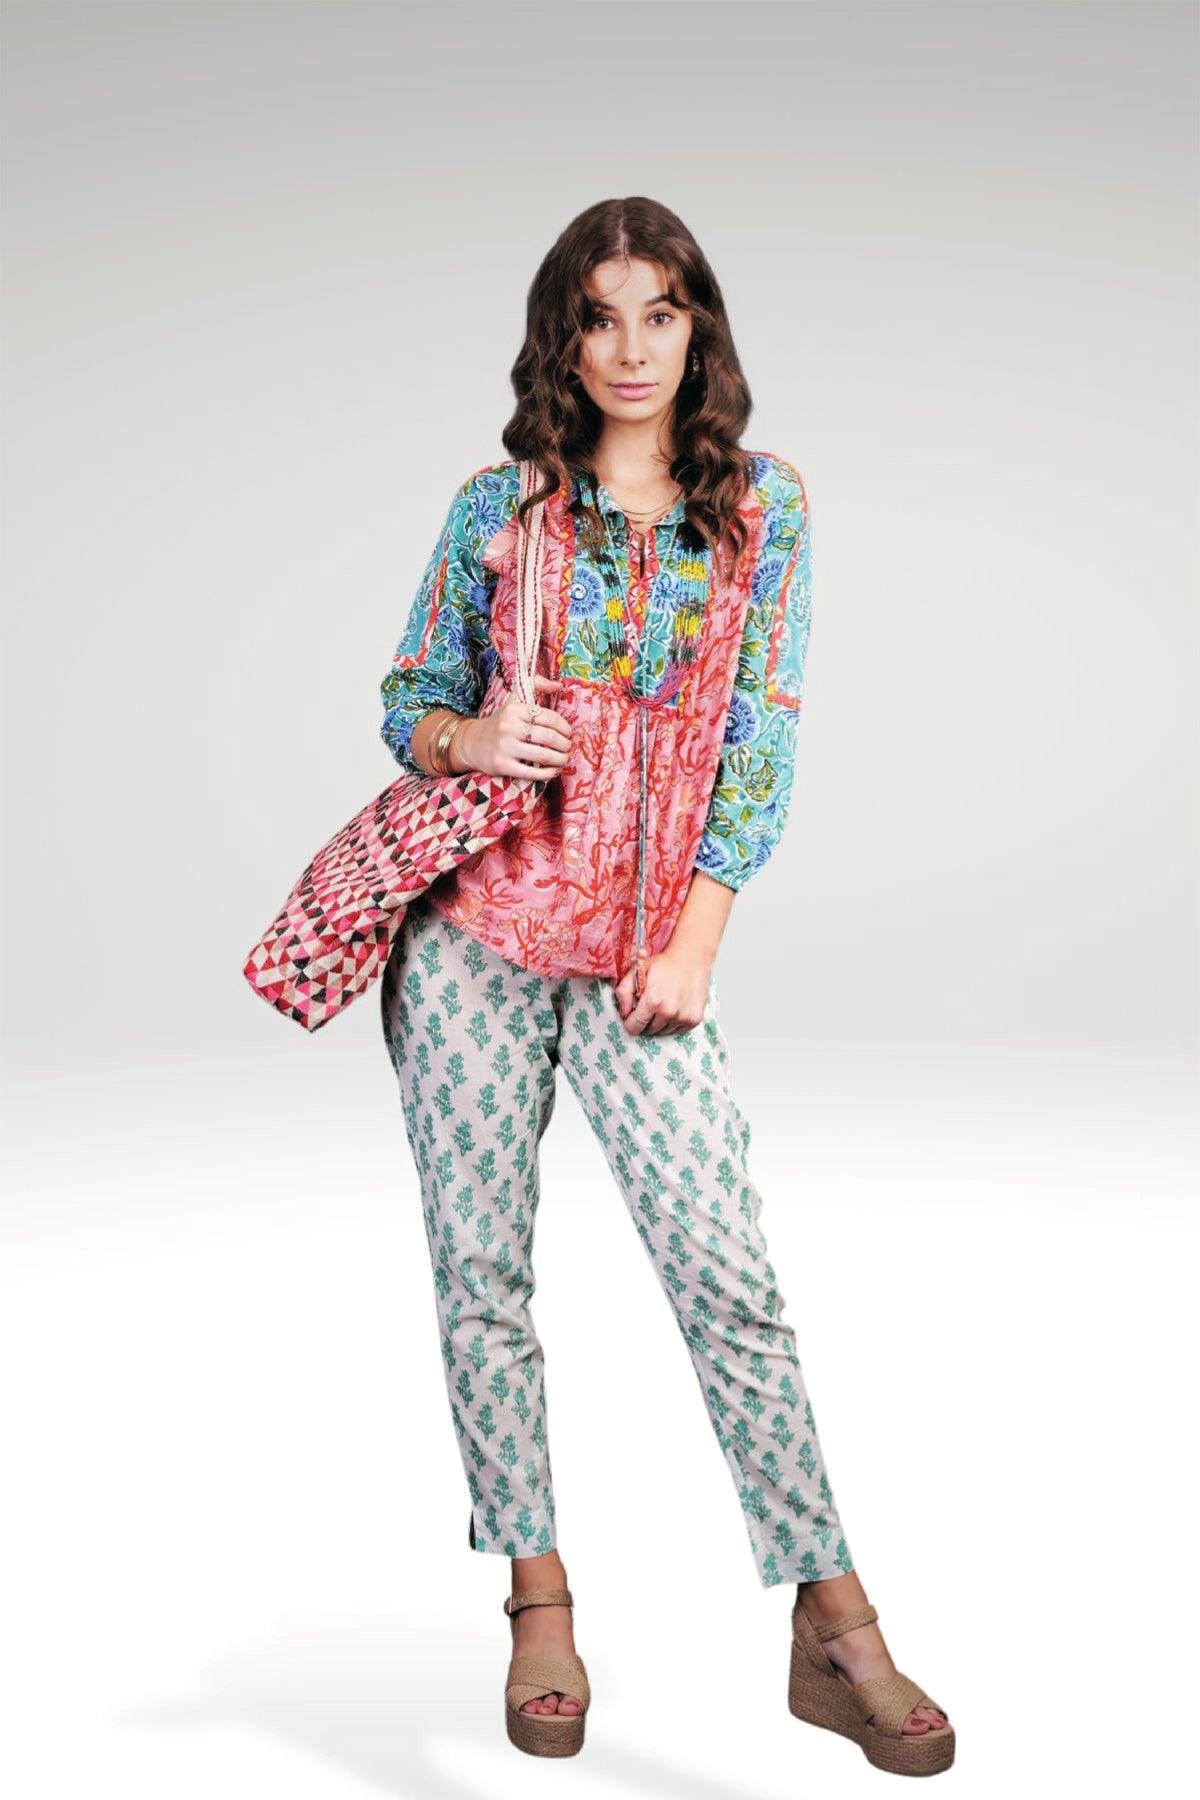 ALEENA FLORAL PATCHWORK TOP - zohaonline SEA PINK COLOURWAY PAIRED WITH BLOCK PRINT PANTS AND BLISS BAG